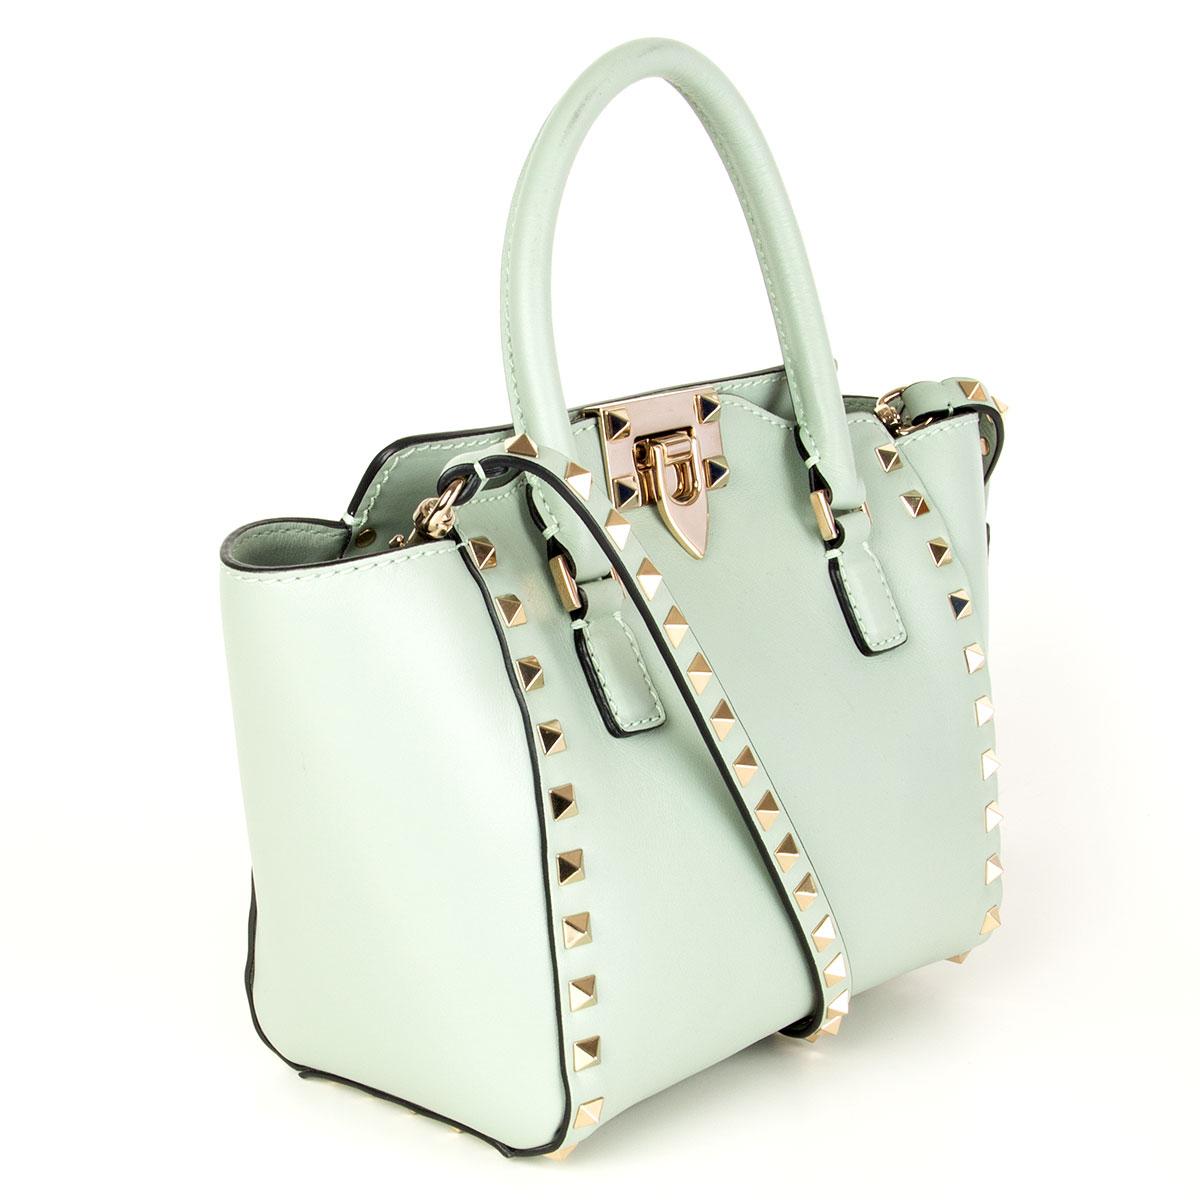  Valentino 'Rockstud Mini Double Handle' in pastel sage green calfskin featuring light gold-tone platinum-finish stud details. Flip lock closure and zip closure. Detachable studded shoulder strap. Lined in beige canvas with one open pocket against